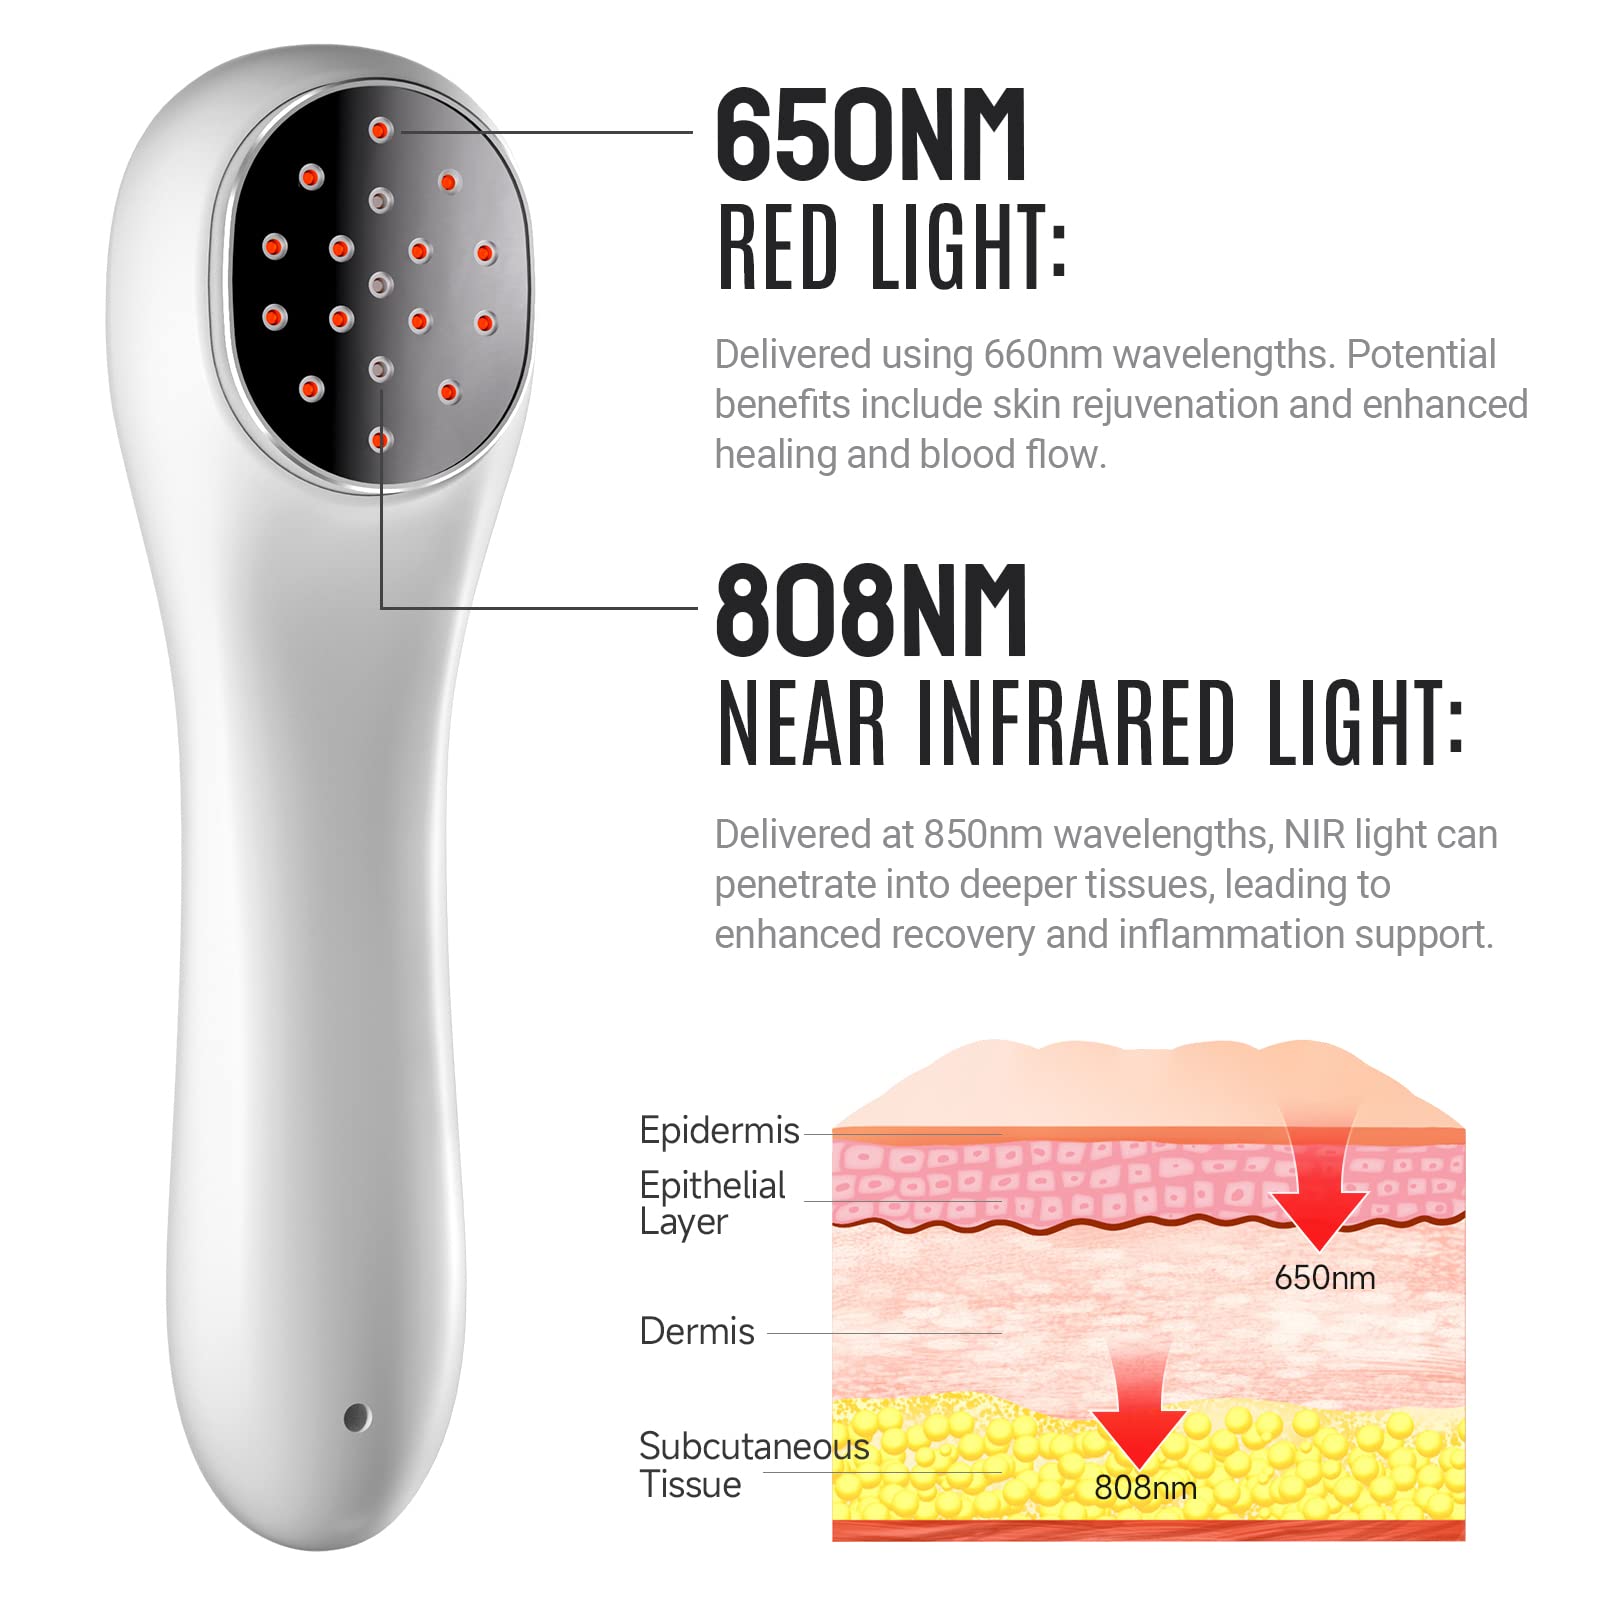 Red Light Therapy, Holsn Infrared Red Light Therapy Device for Body Targets Joint and Muscles Directly for Pain Relief, 650 nm & 808nm Red Light Therapy Wand